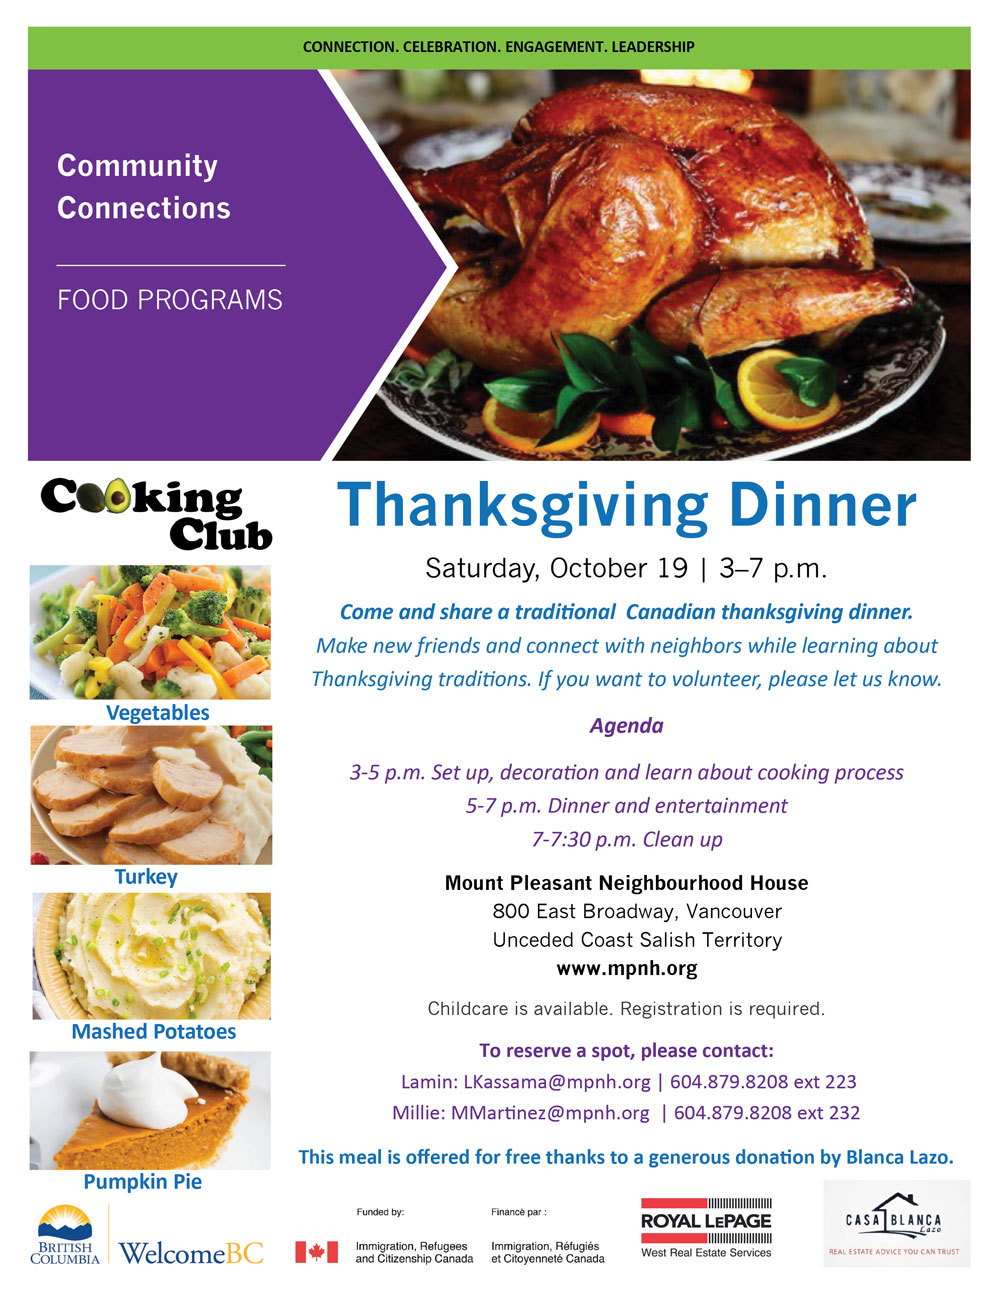 An image of the poster with event details, featuring a photo of menu items: vegetables, mashed potatoes, turkey and pumpkin pie